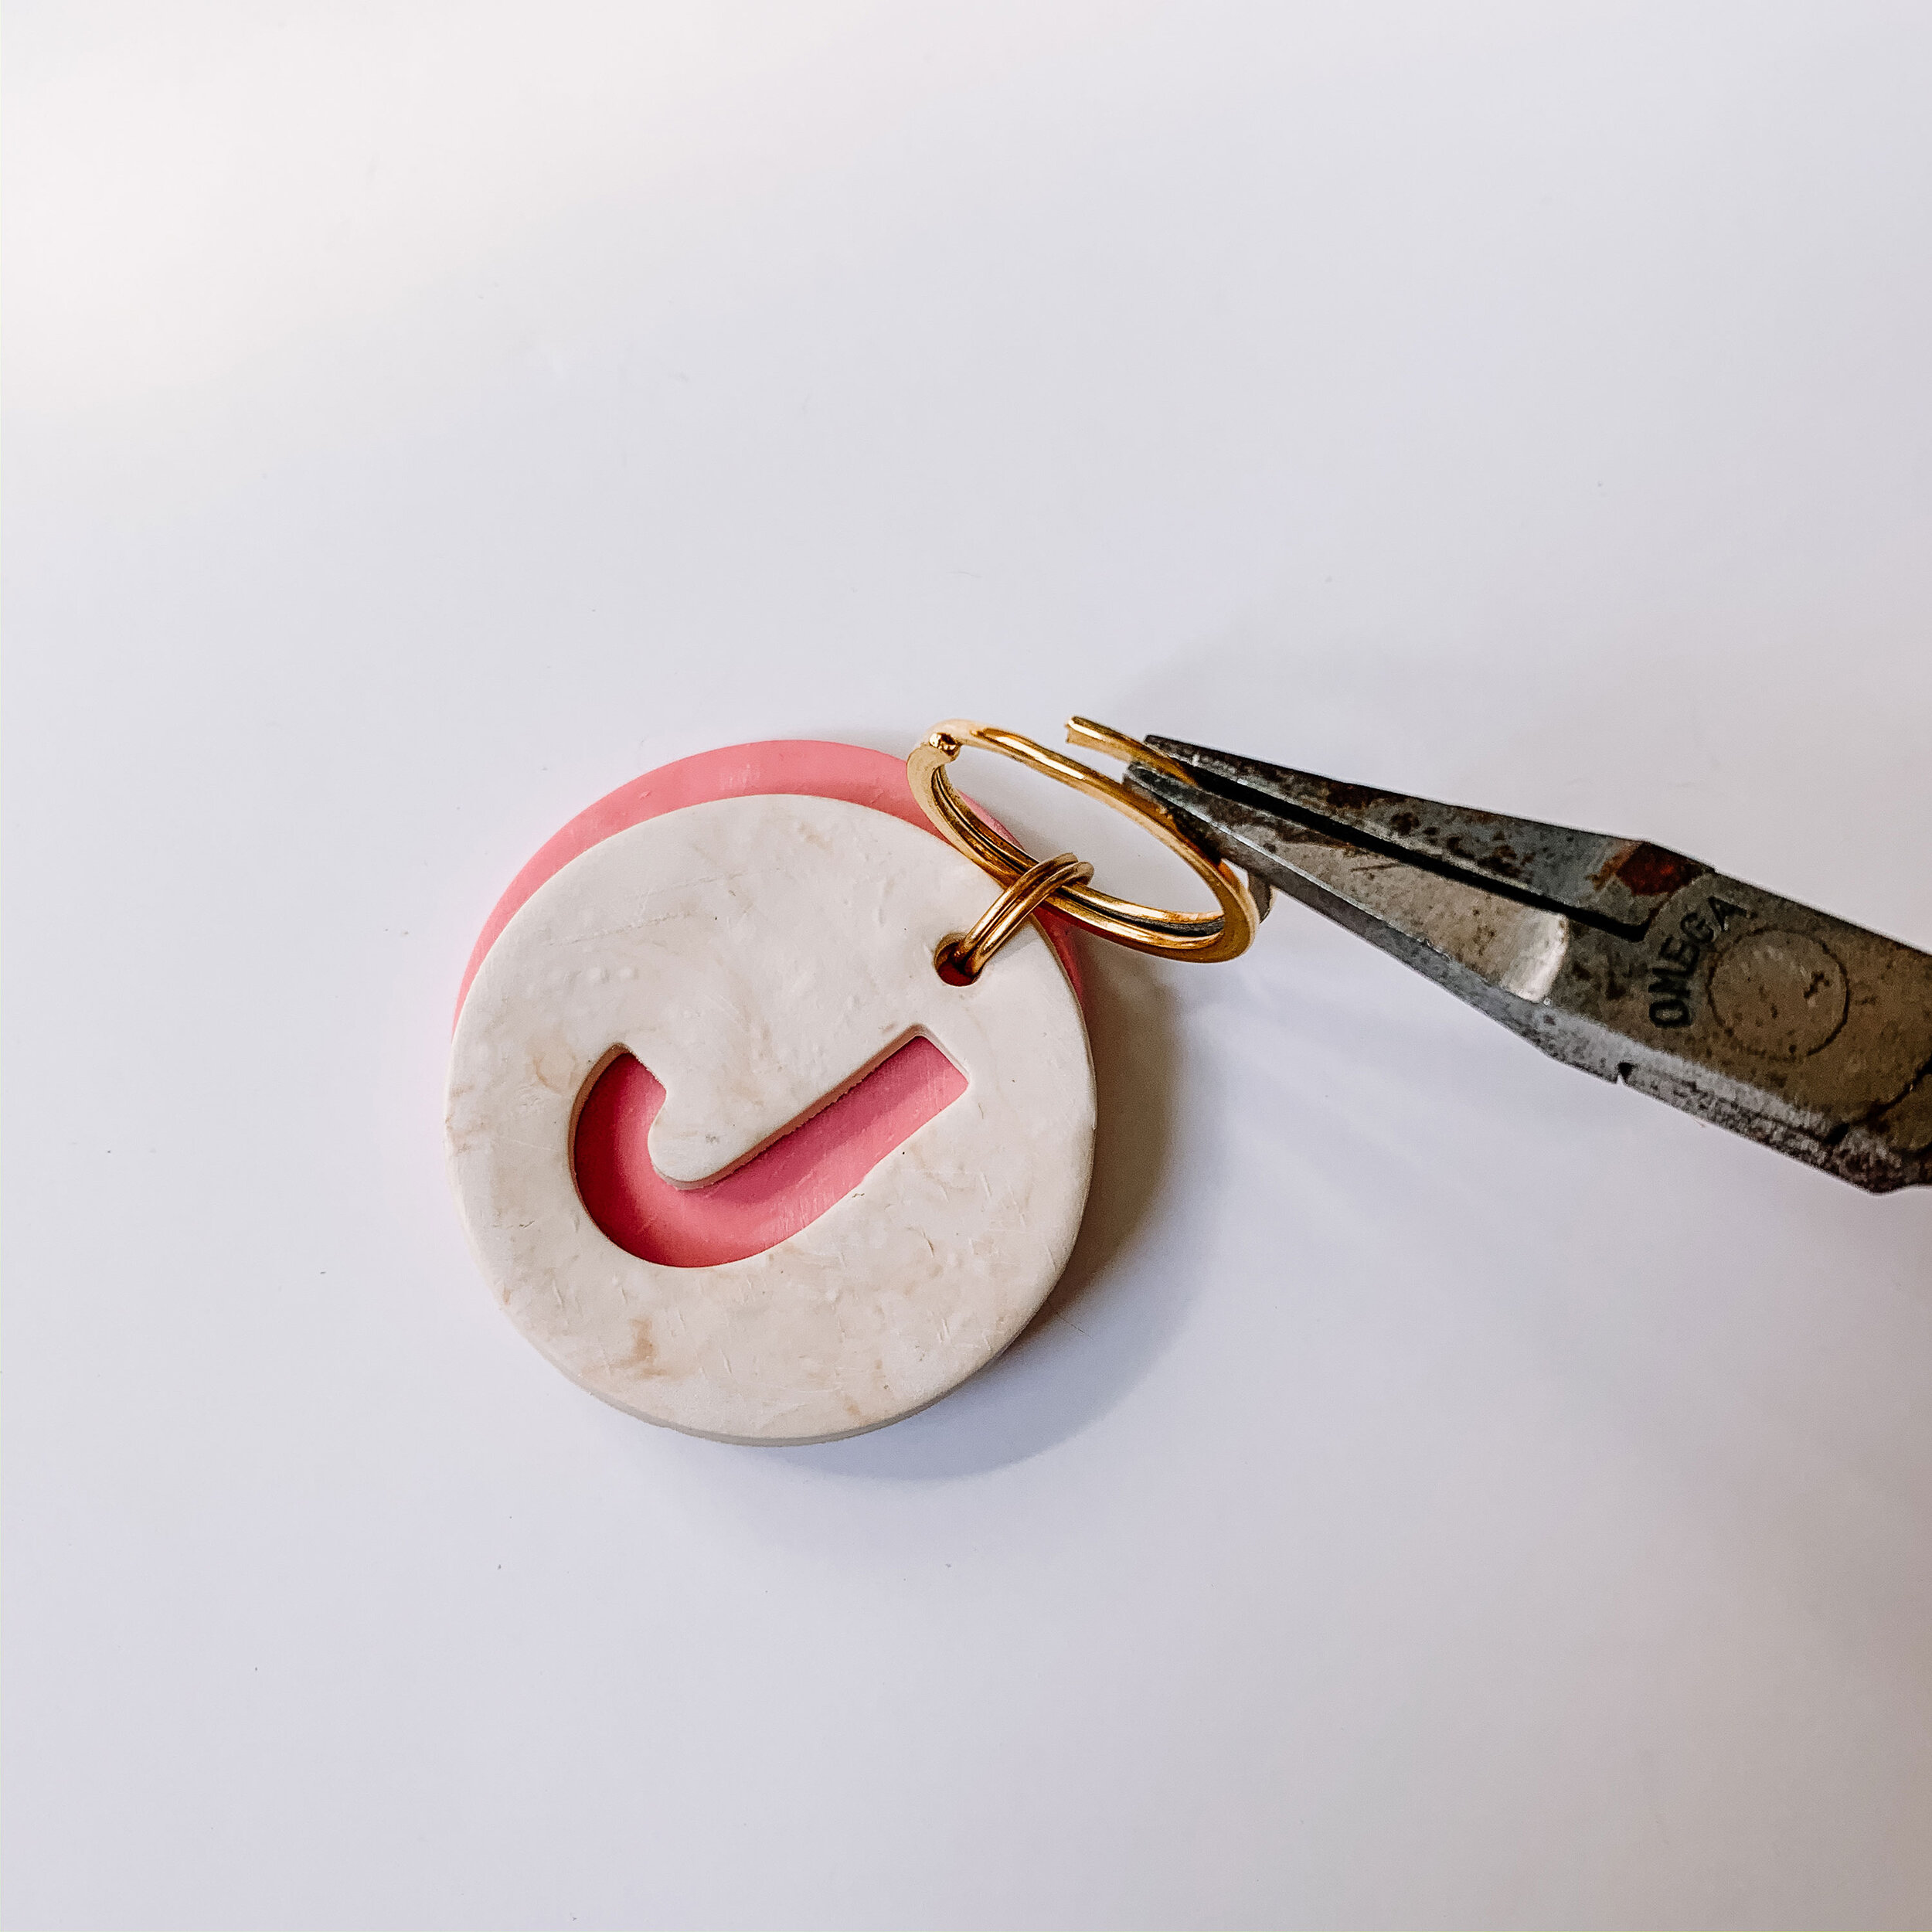 Braided Clay DIY Keychain - Delineate Your Dwelling